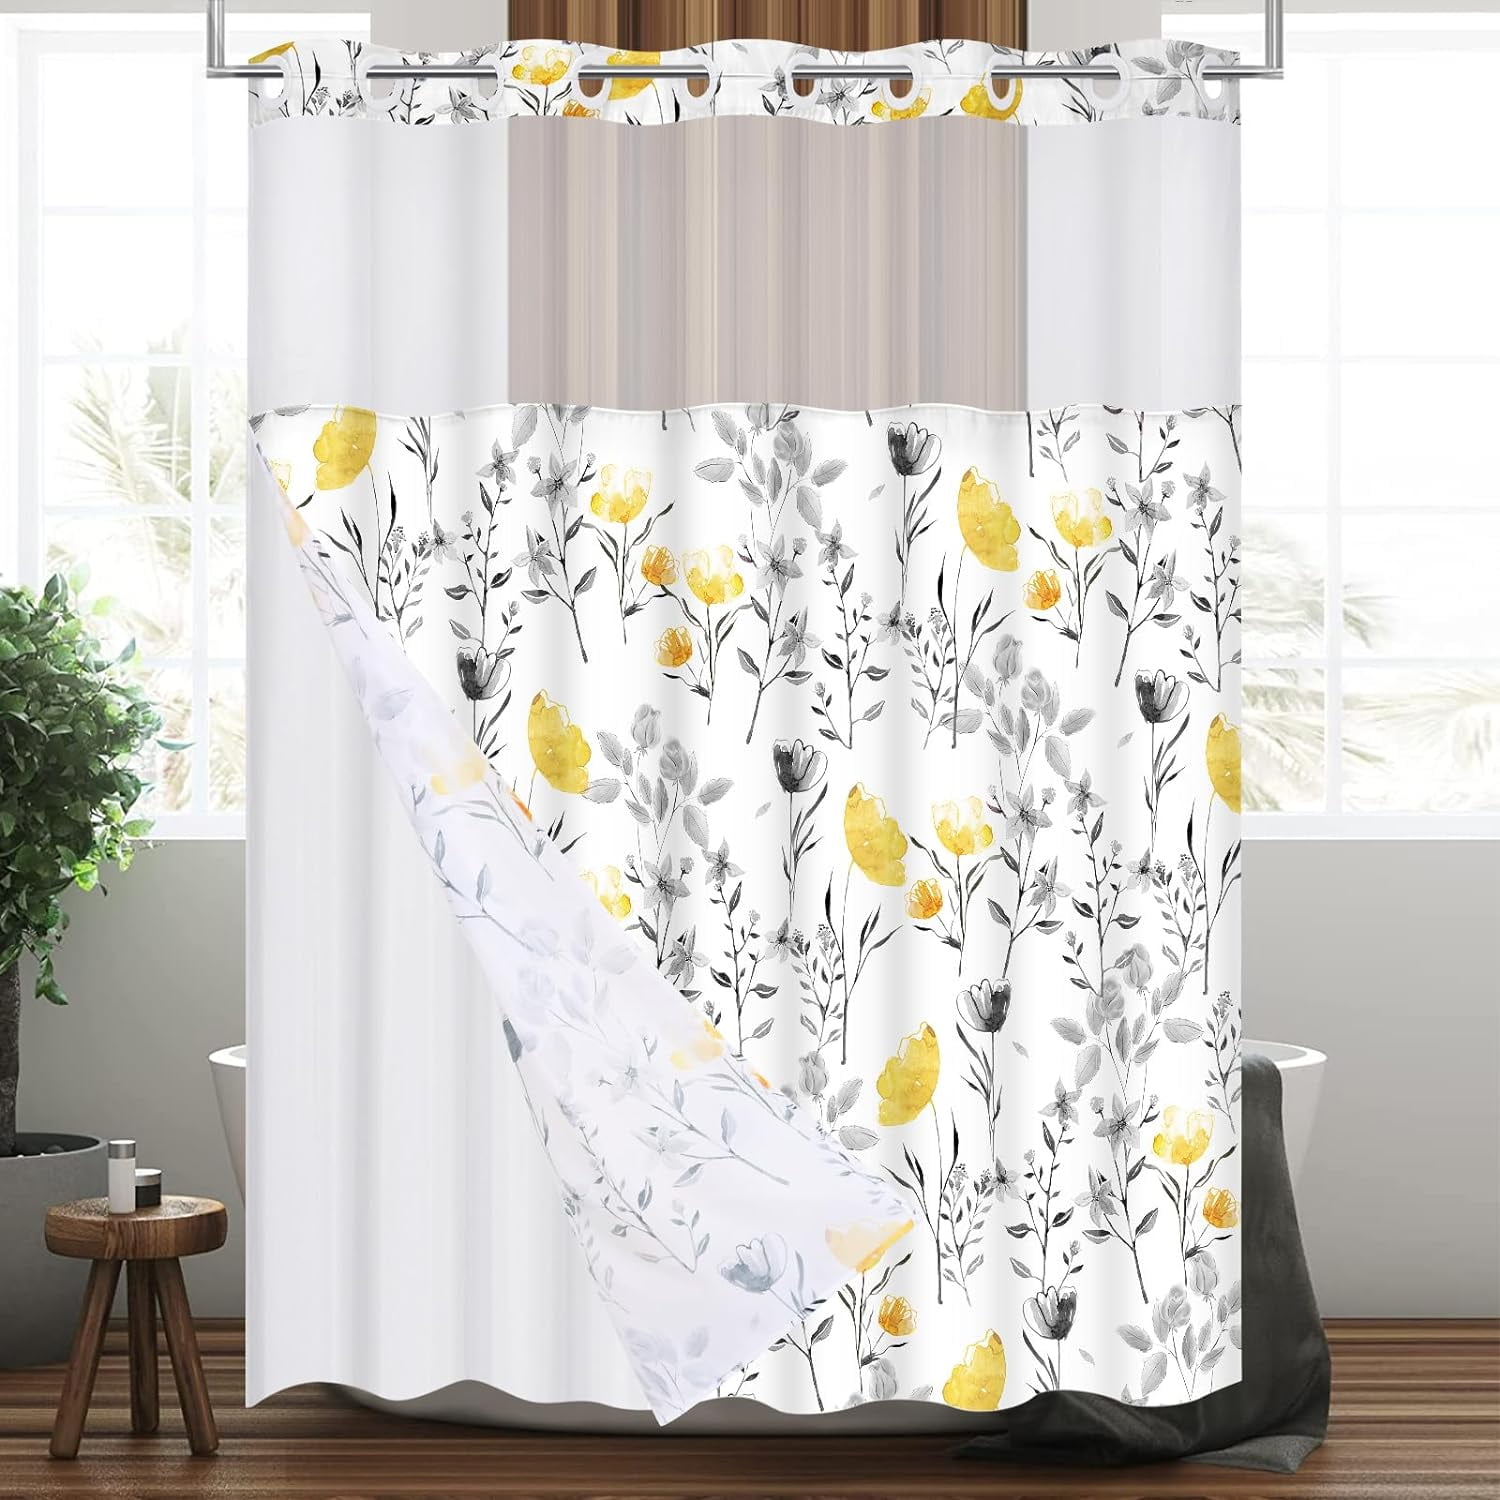 Ikfashoni Hookless Shower Curtain with Snap in Liner, Teal Floral  Waterproof No Hook Mesh Window Bath Curtain, 71X74 